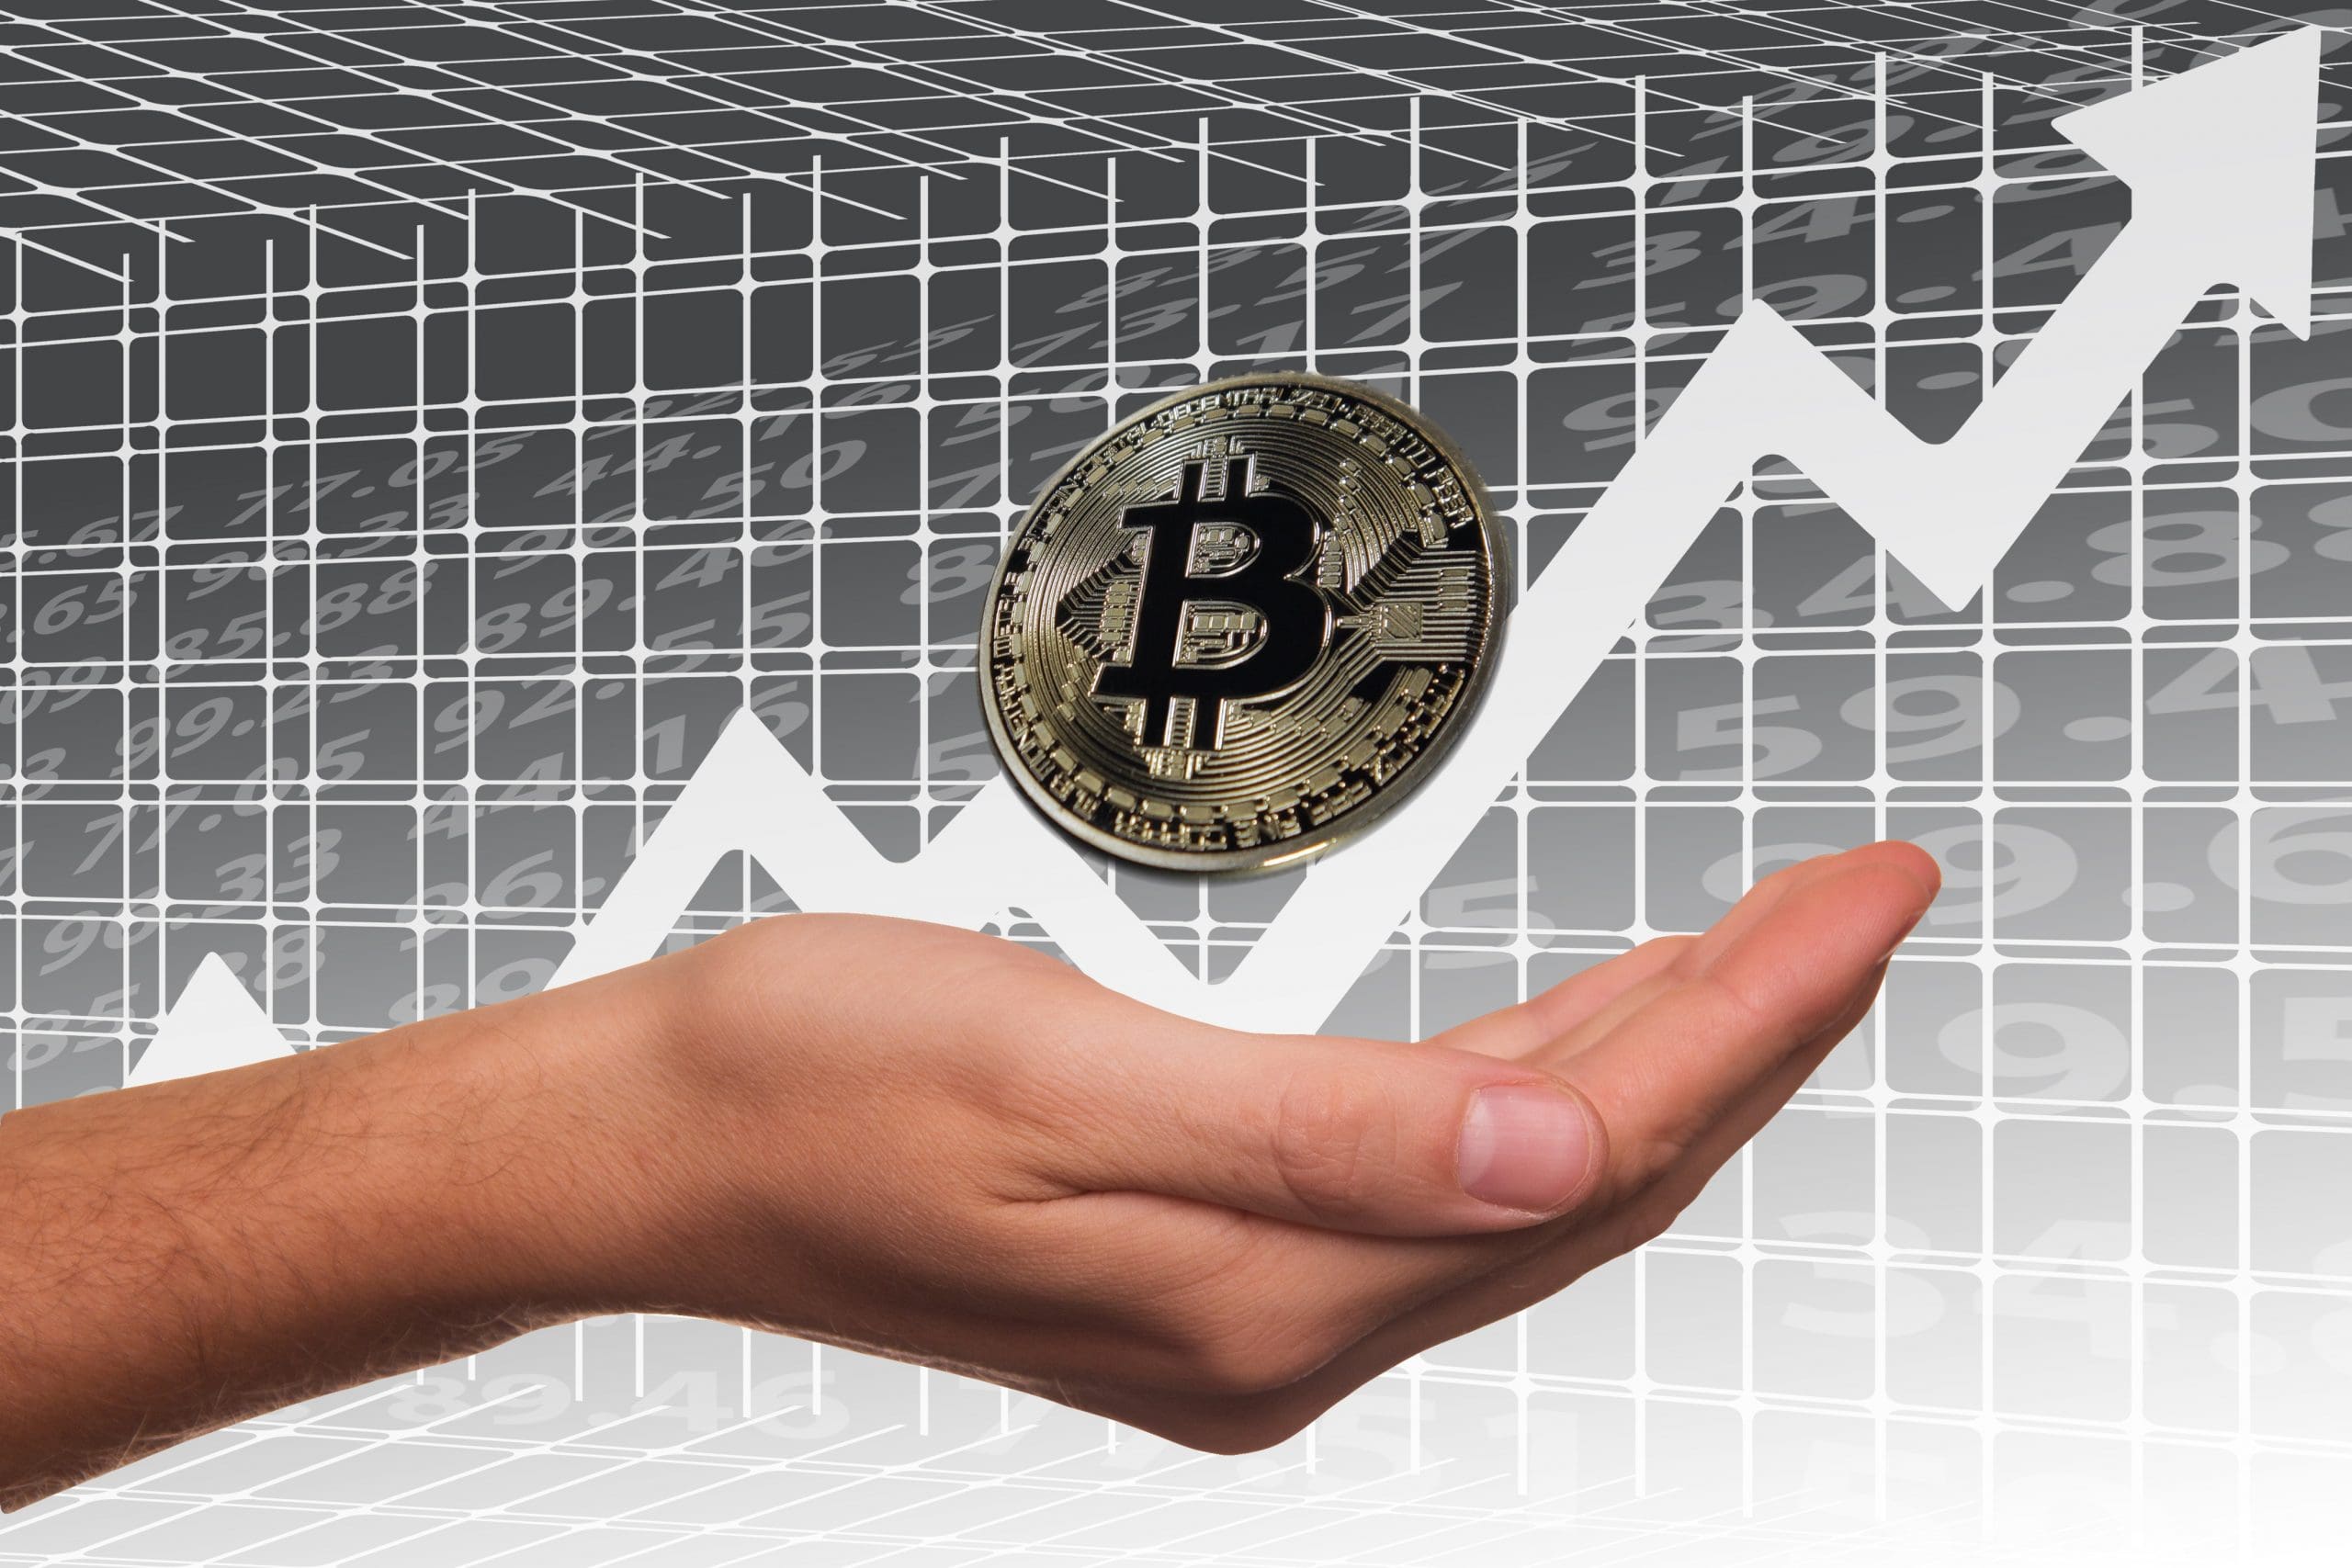 6 Methods to Make Good Money with Bitcoin - The European Business Review